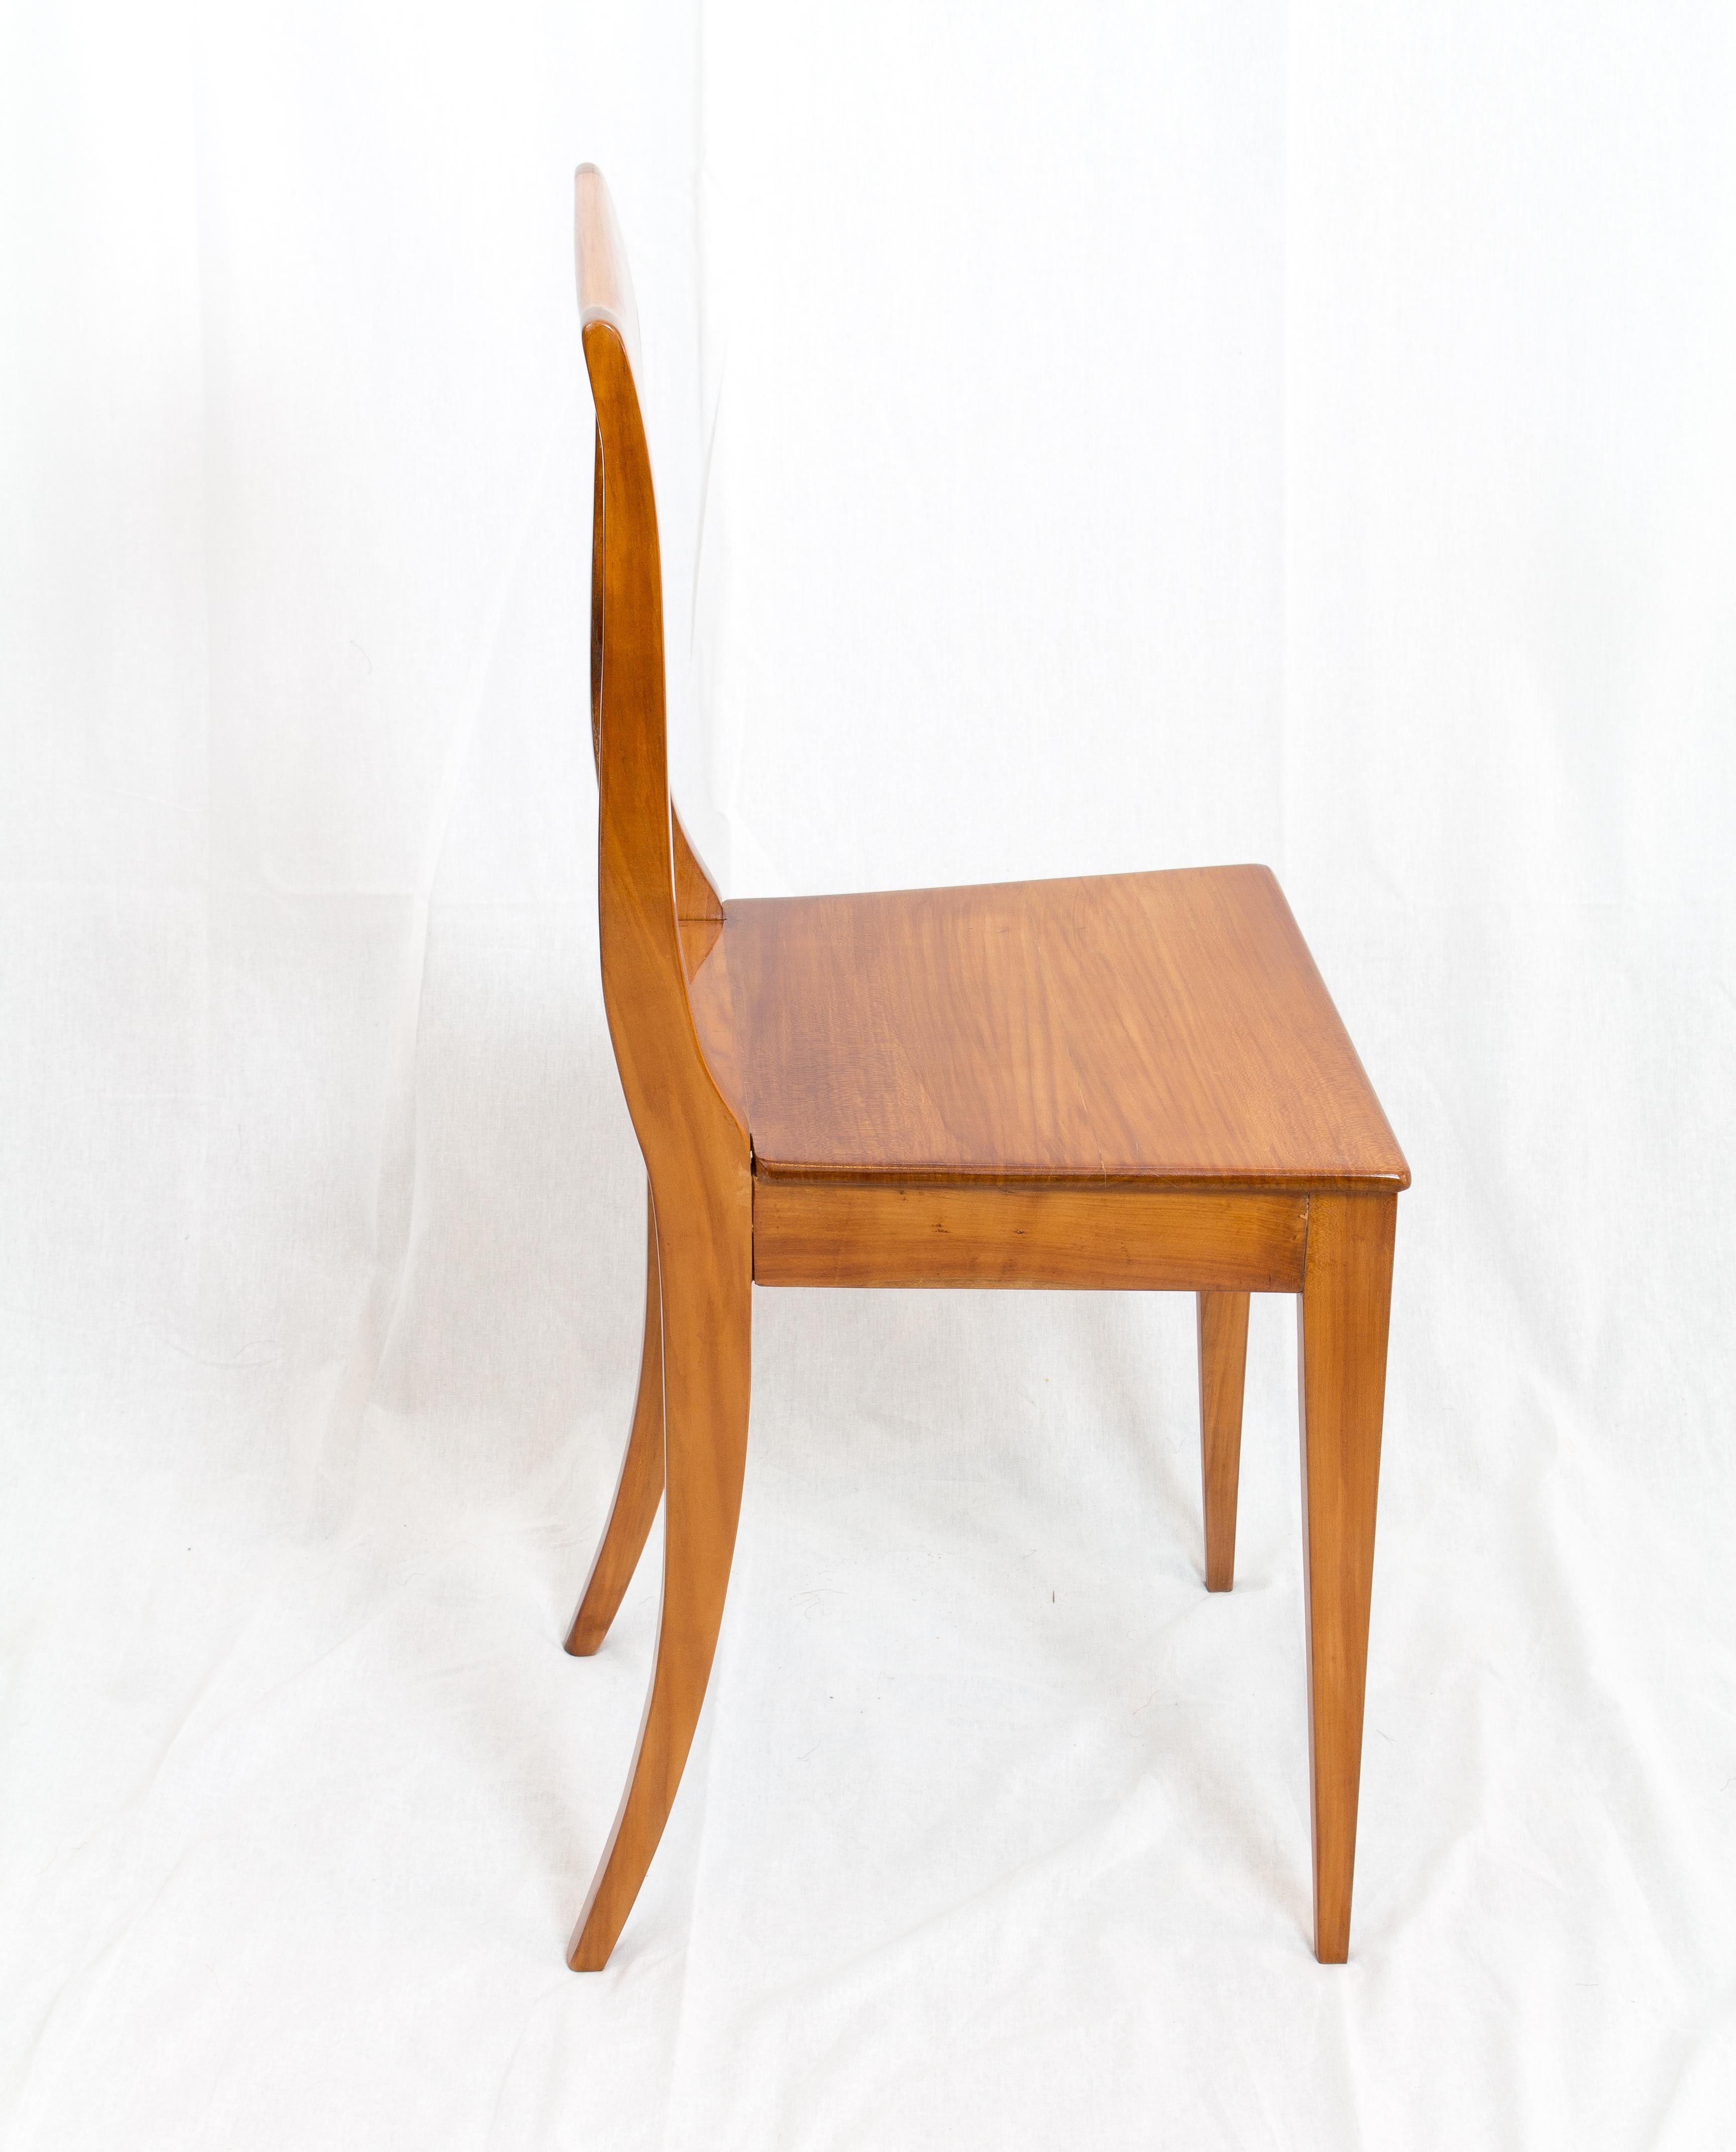 A chair from the time of the Biedermeier, circa 1830. The chair is made of solid cherrywood.
In very good restored condition.